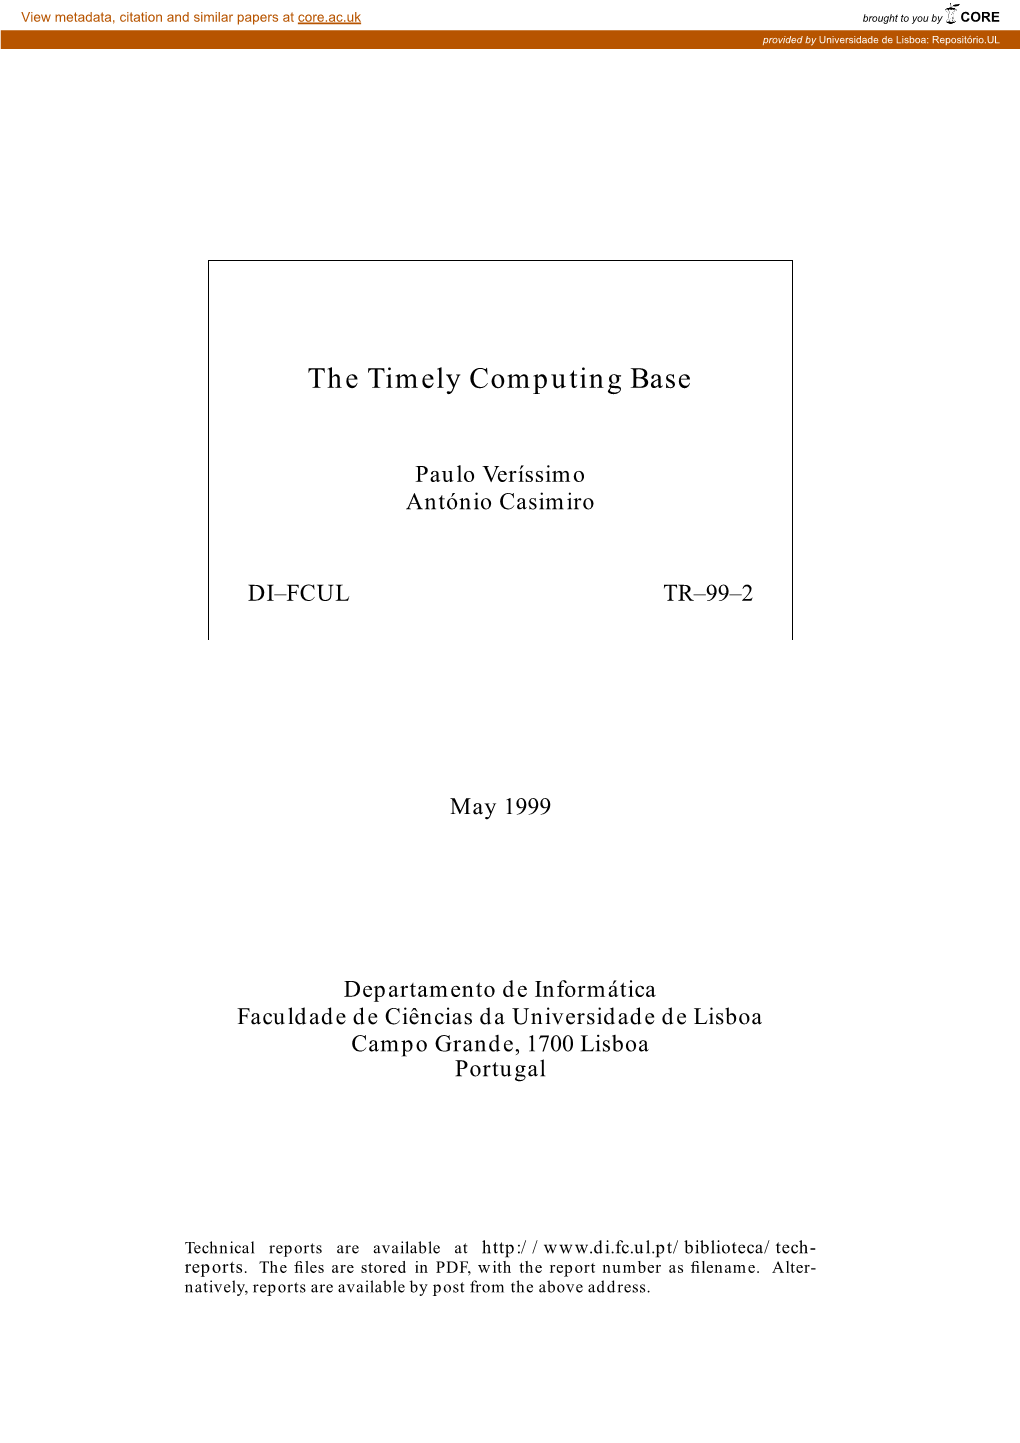 The Timely Computing Base